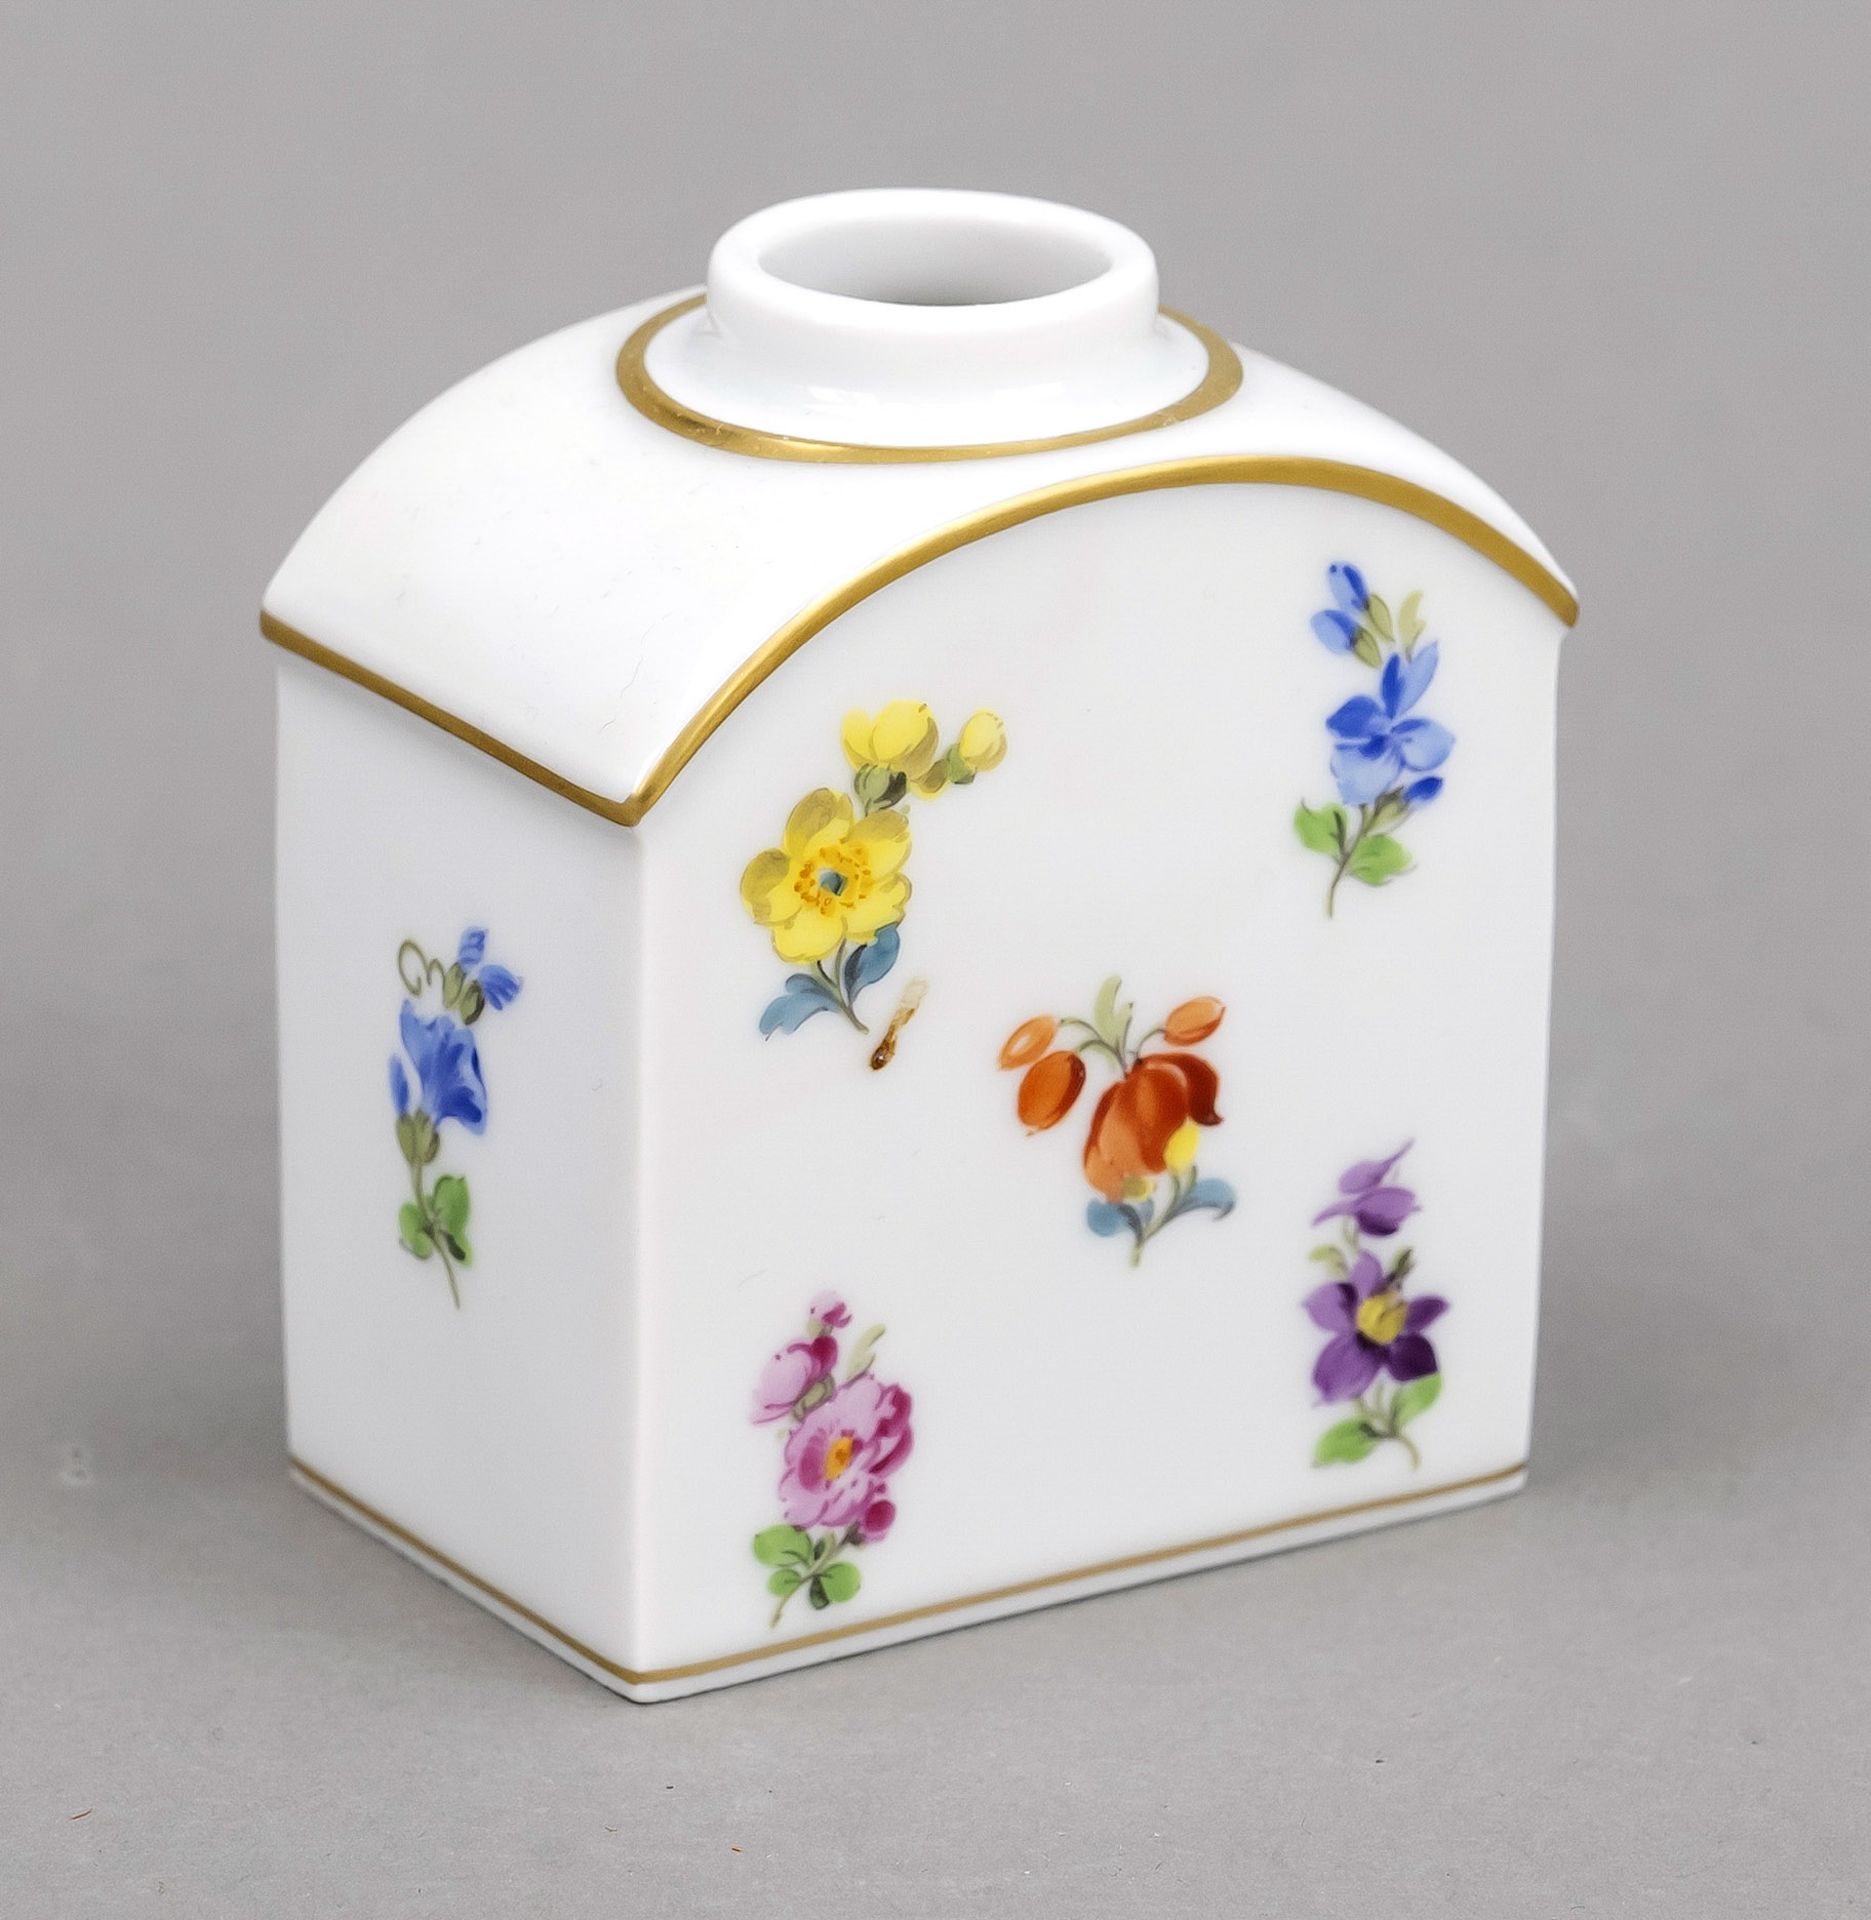 Small tea caddy, Meissen, c. 1980, 2nd century, curved shoulder, missing lid, polychrome painting - Image 2 of 2